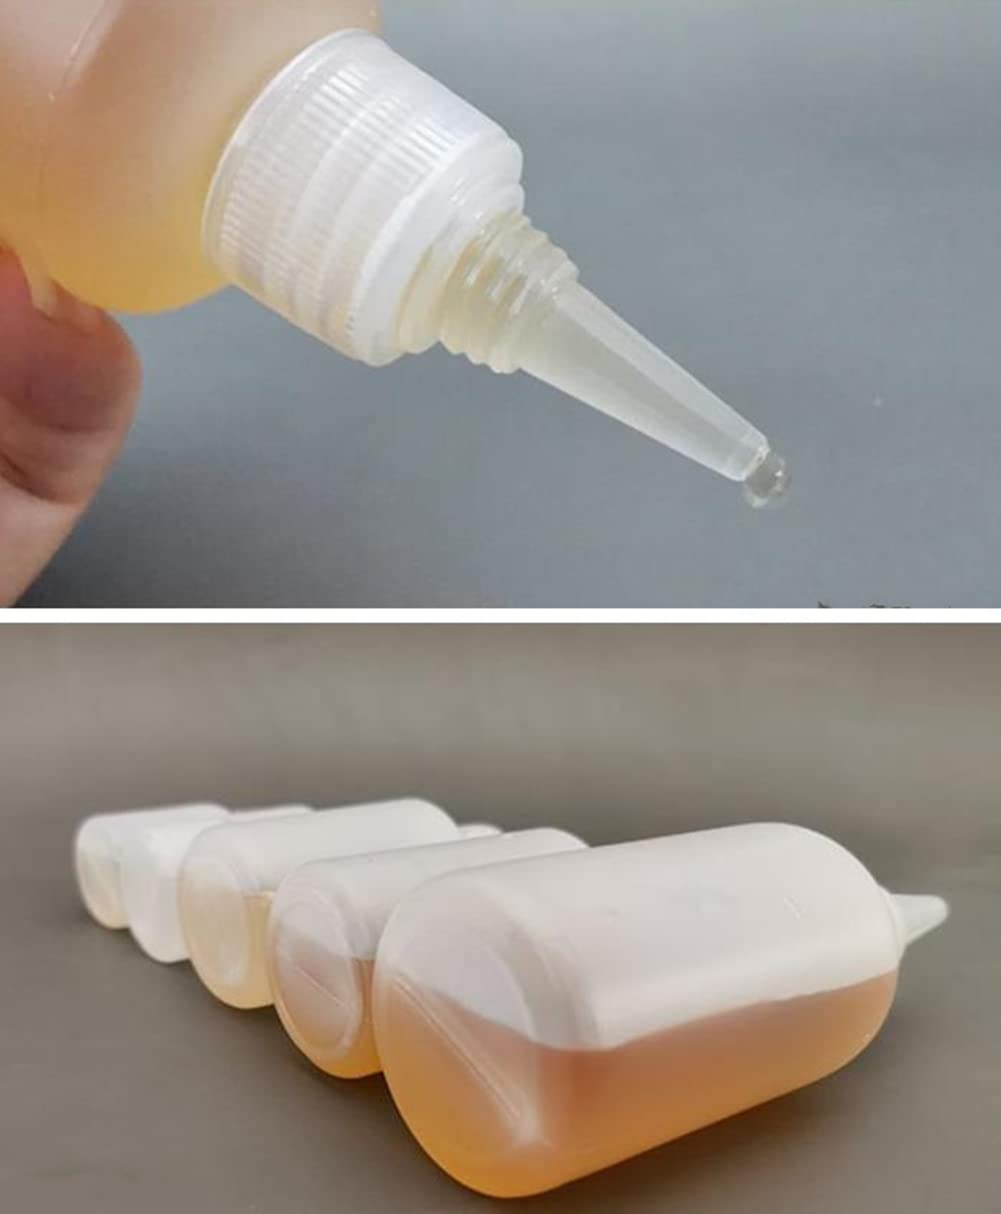 Plastic Squeeze Bottles With Scales 10 Pack Small Squeeze Bottles with Tip Caps Squirt Bottles for Liquid, Condiments, Sauces, Paint, Oil, Glue, Icing, Baking, Art Crafts, BBQ (60ml/2oz)